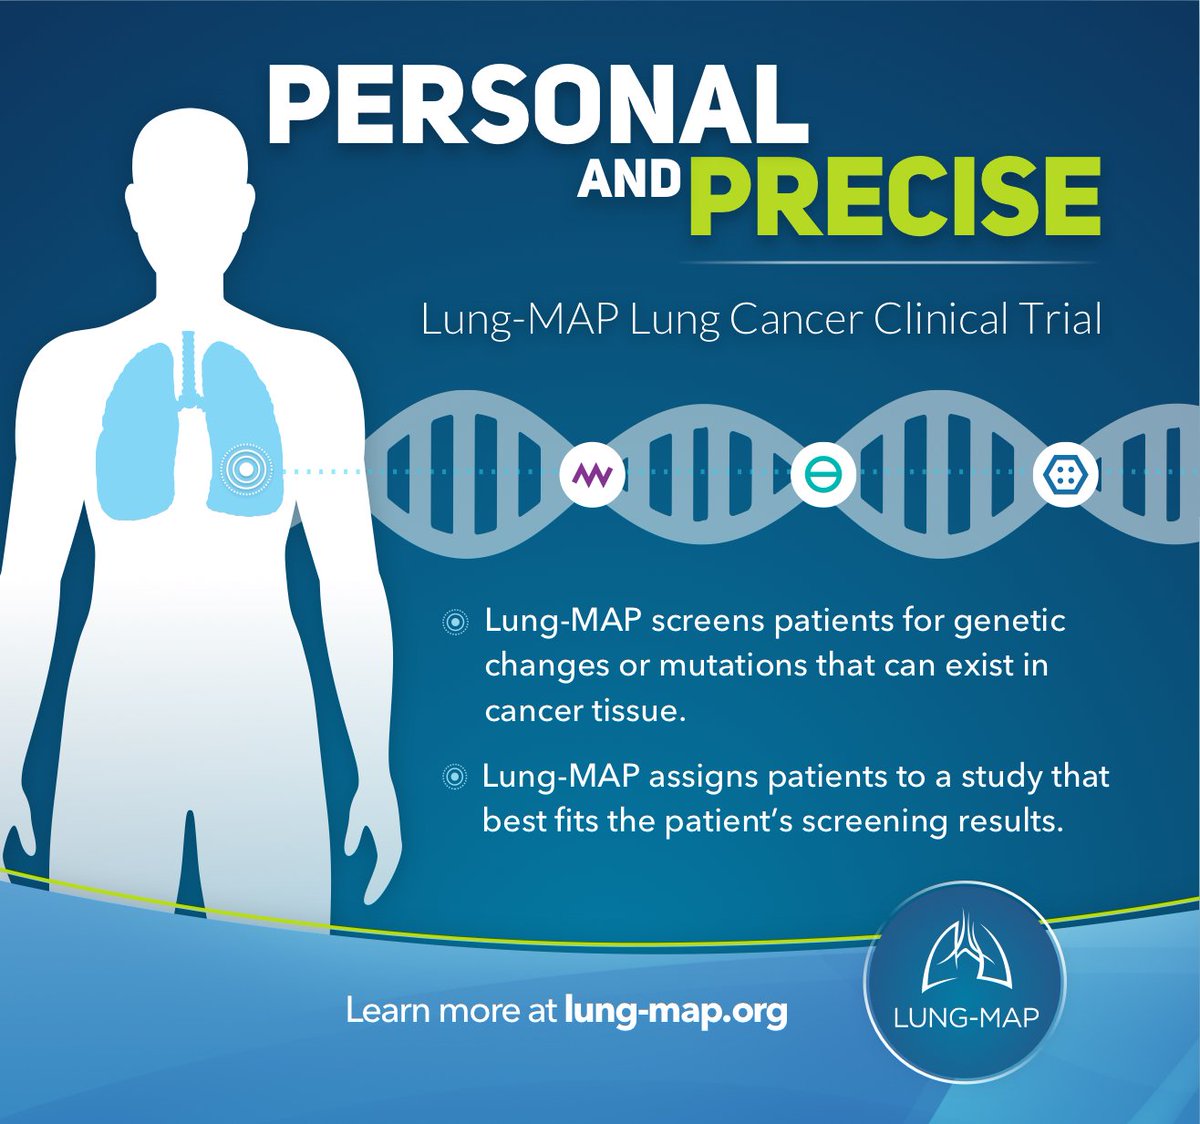 Since its launch in 2014, @LungMAP has worked to find the right #clinicaltrial for each patient, enrolling more than 1,100 patients to precision medicine studies testing new treatments for their #nonsmallcelllungcancer. #NSCLC #LungCancerAwarenessMonth lung-map.org